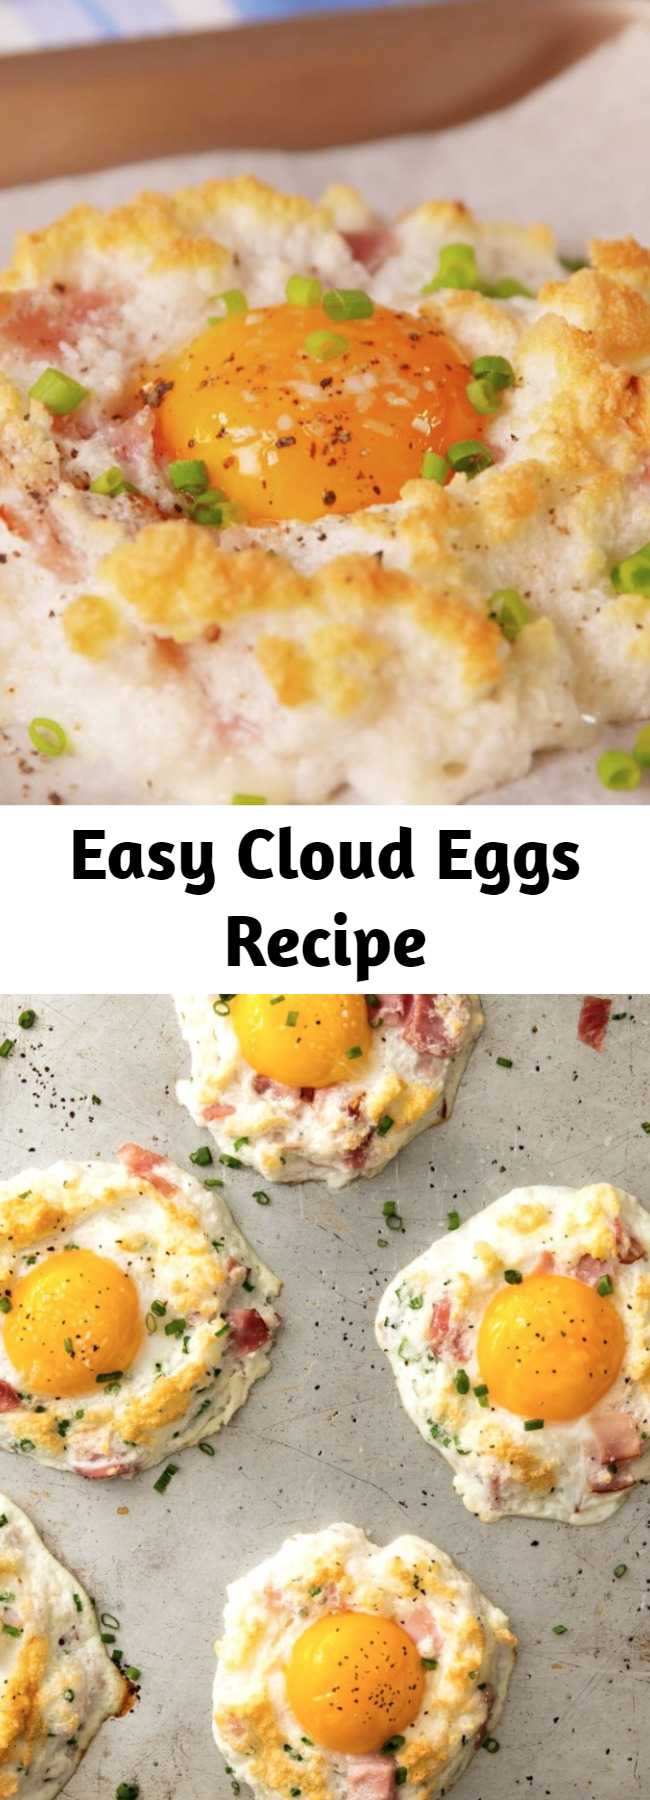 Easy Cloud Eggs Recipe - Fluffy cloud eggs are actually way easier than they look. The secret? Stiff egg whites. #easy #recipe #cloudeggs #eggs #cloud #brunch #breakfast #eggwhites